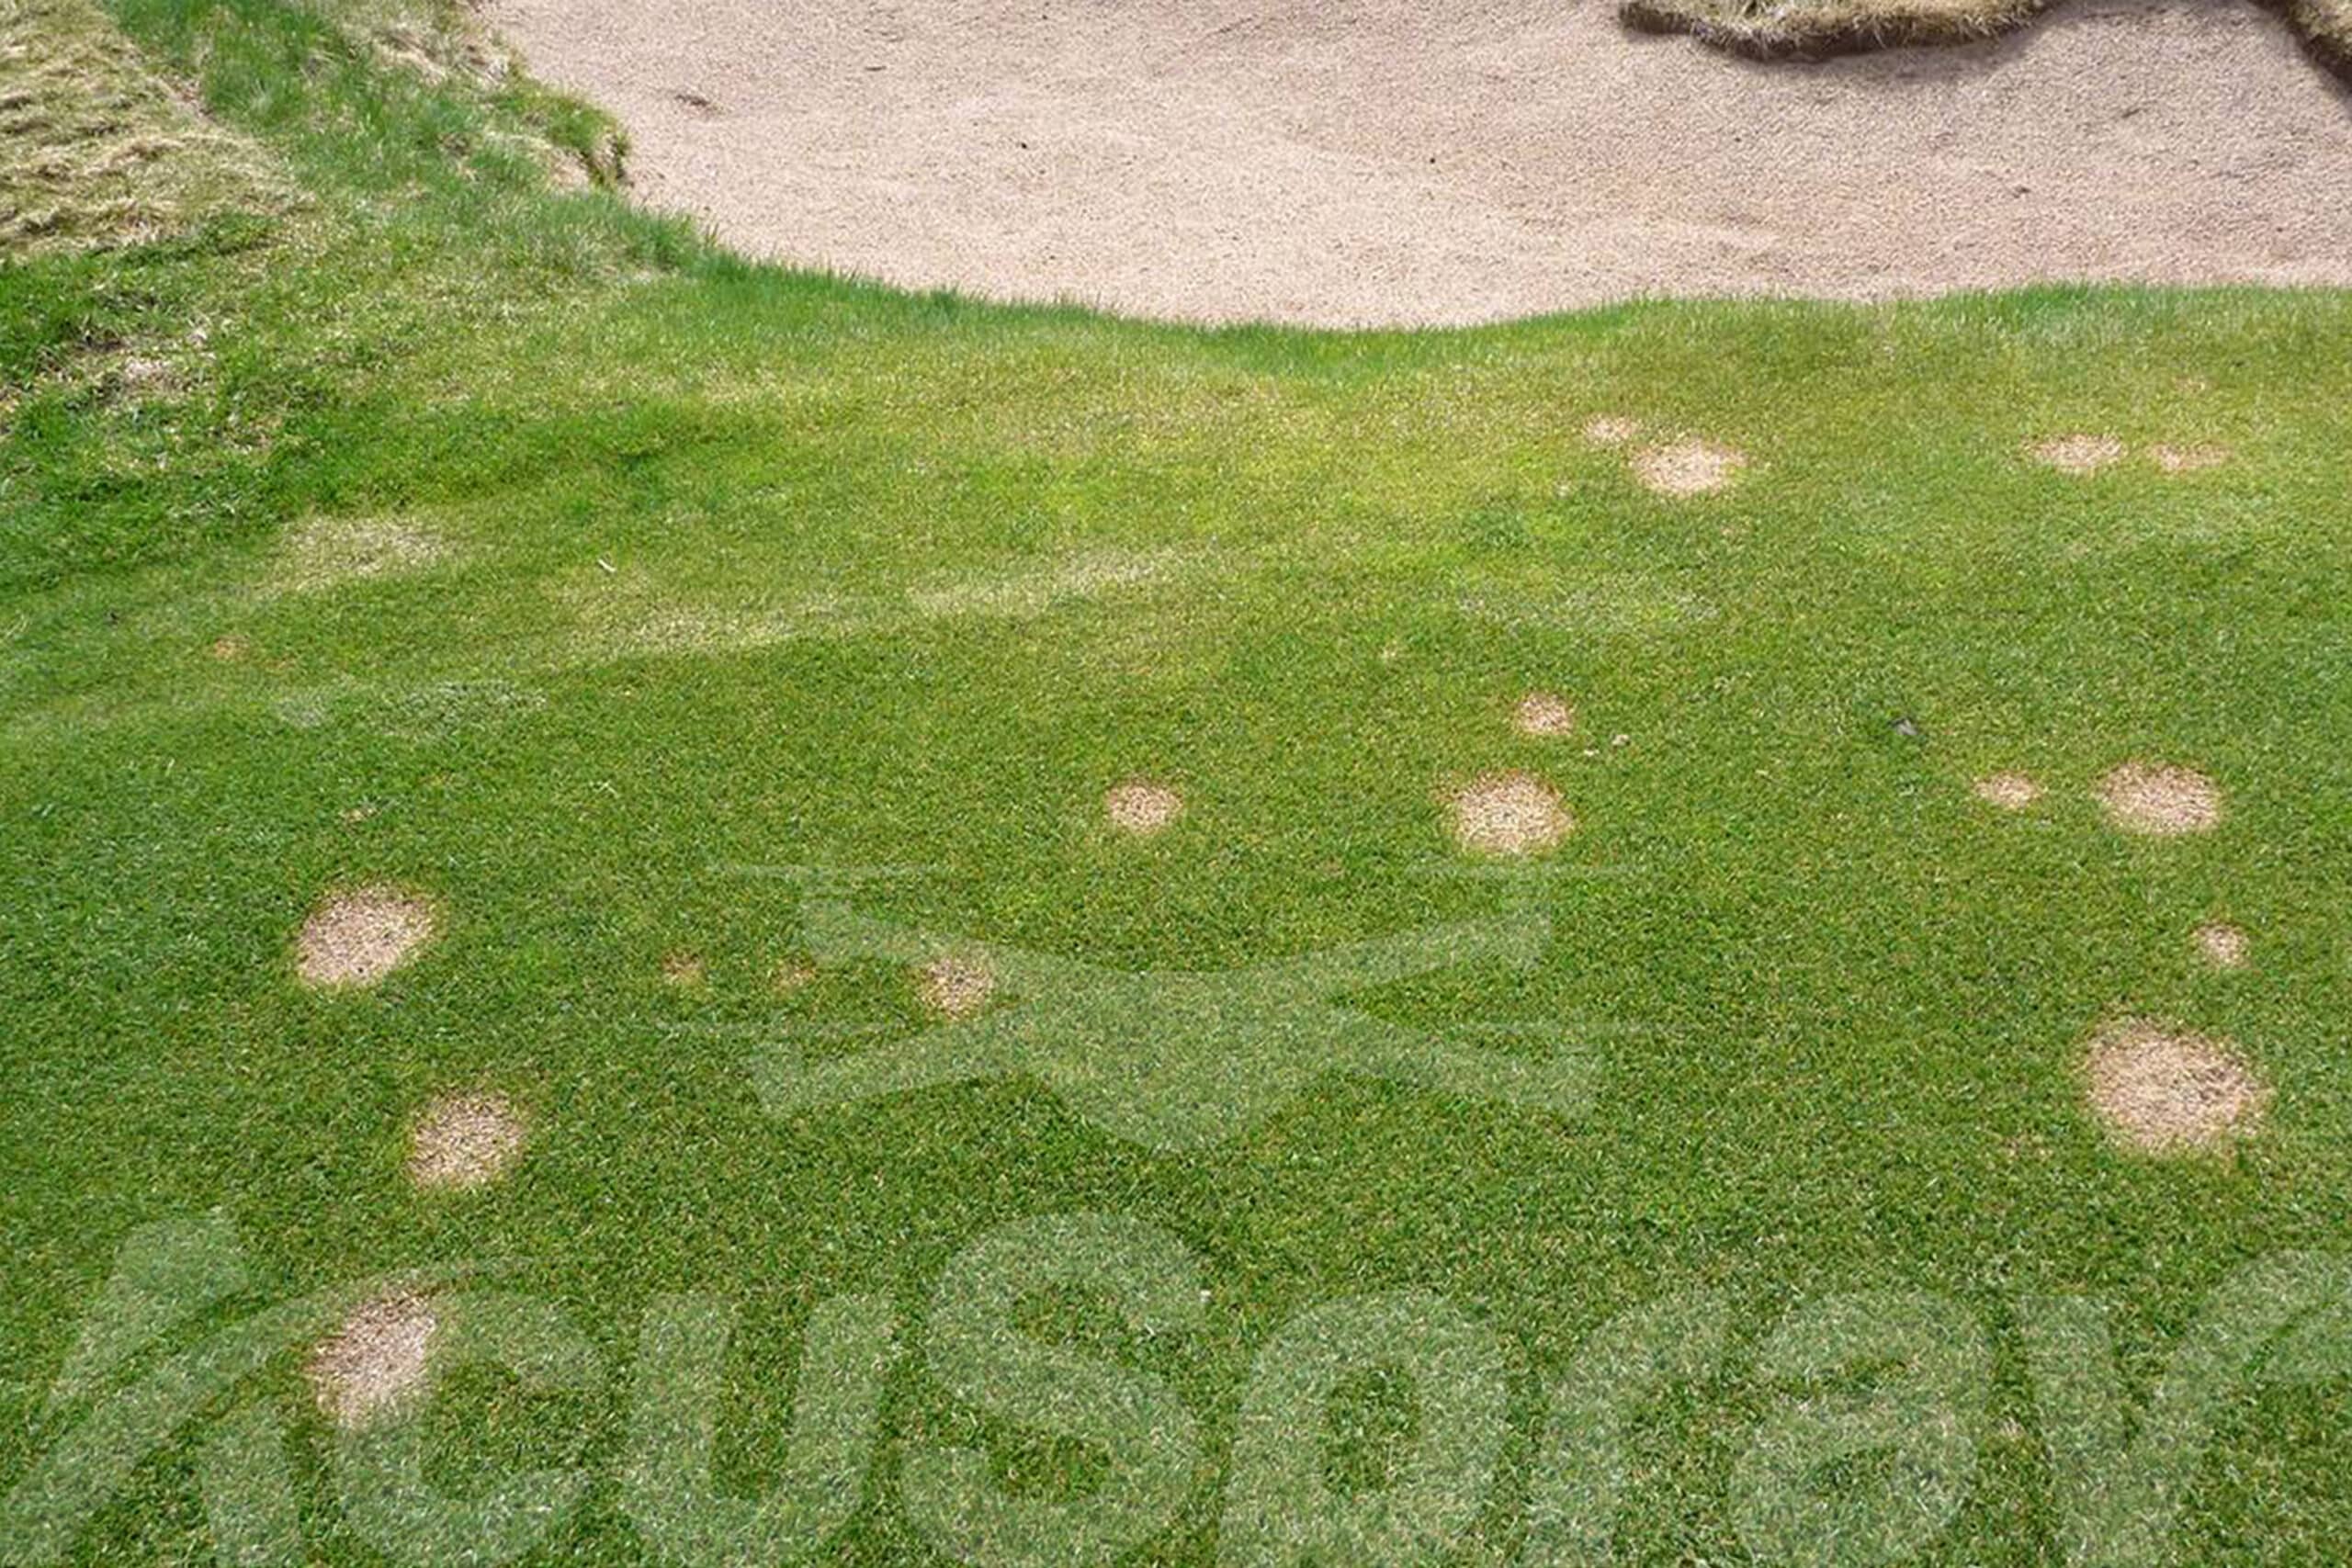 Snow Mold Damage On Golf Course Scaled 